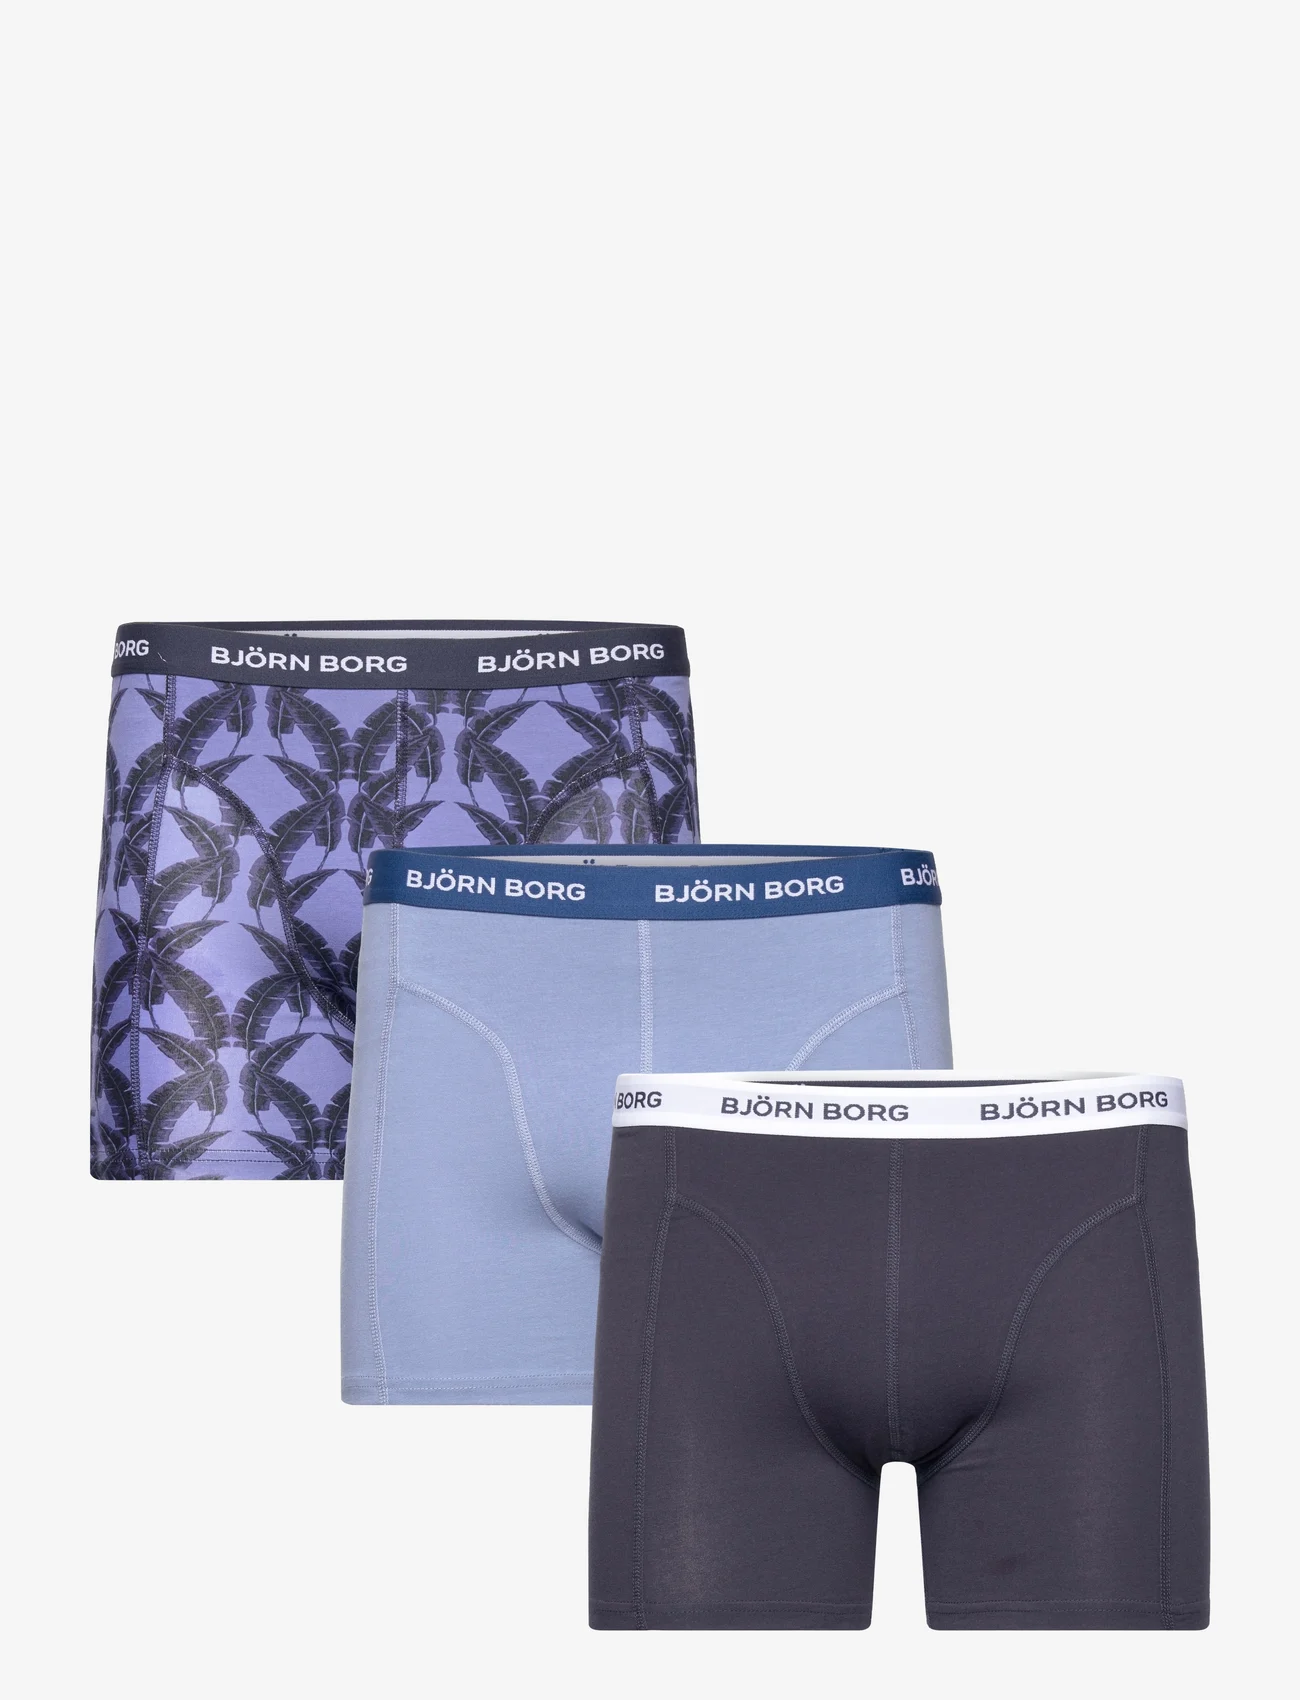 Björn Borg - COTTON STRETCH BOXER 3p - lowest prices - multipack 2 - 0